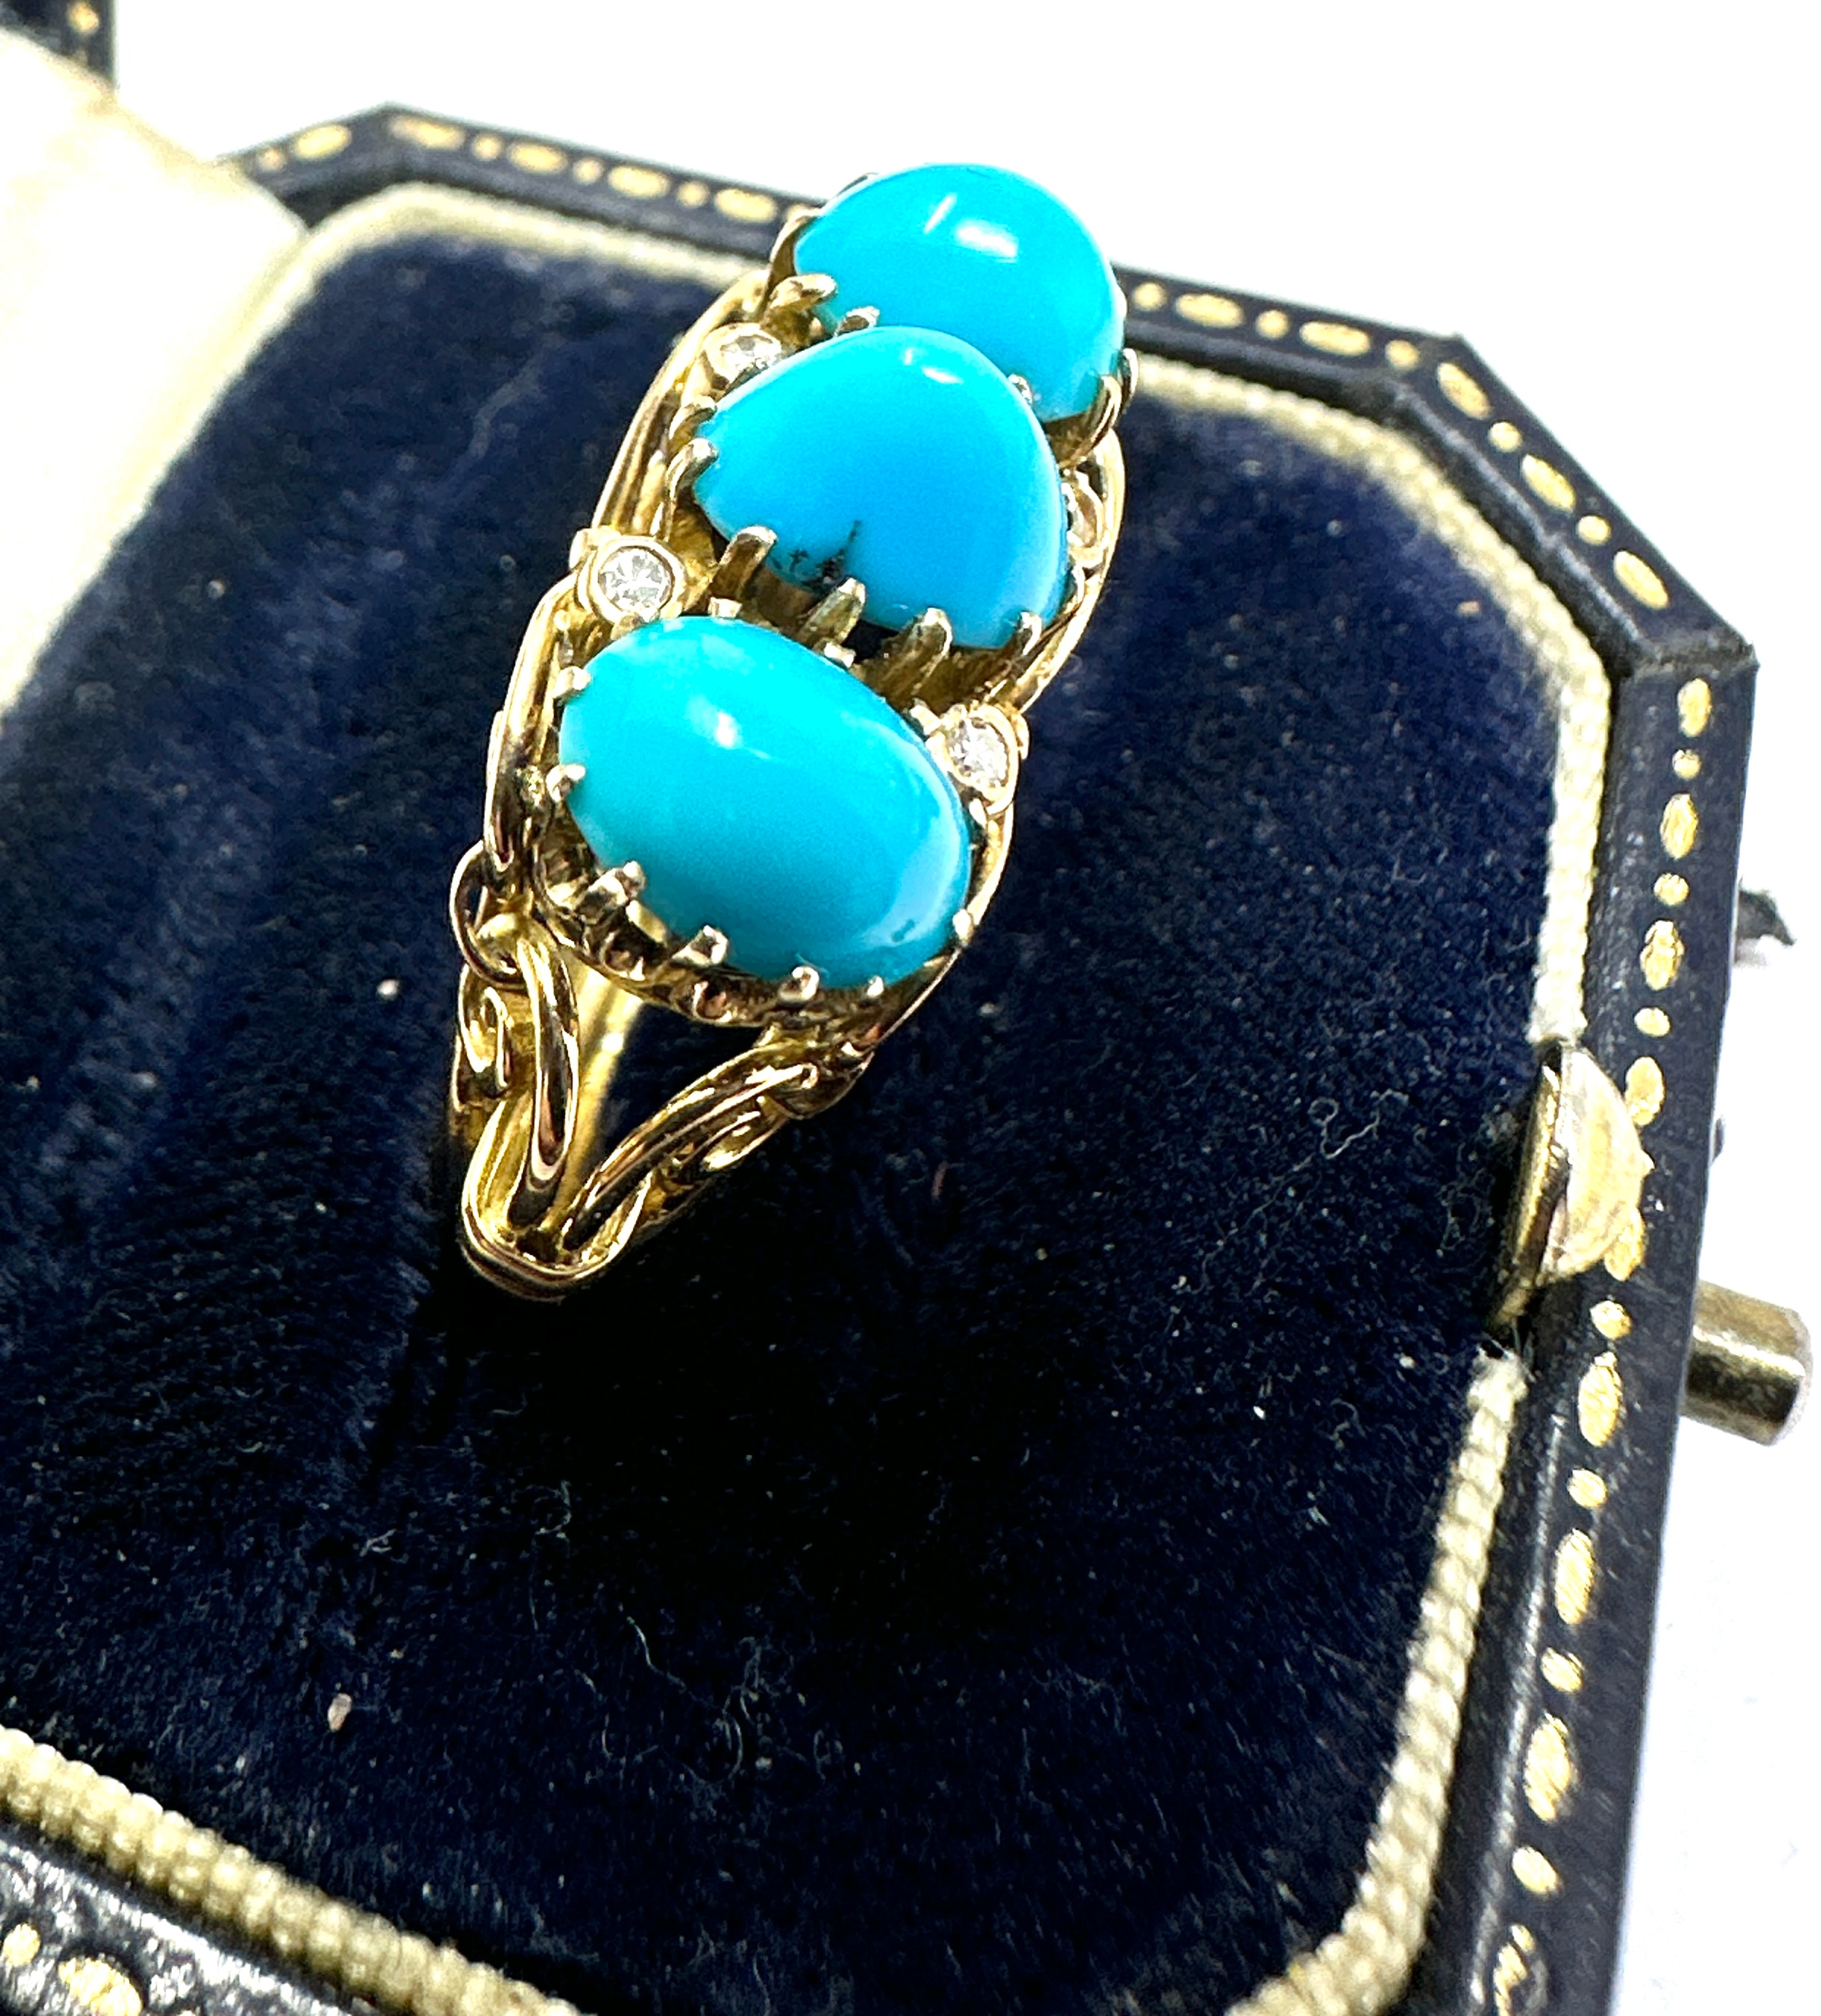 18ct turquoise & diamond ring weight 6.6g xrt tested as 18ct gold - Image 2 of 5